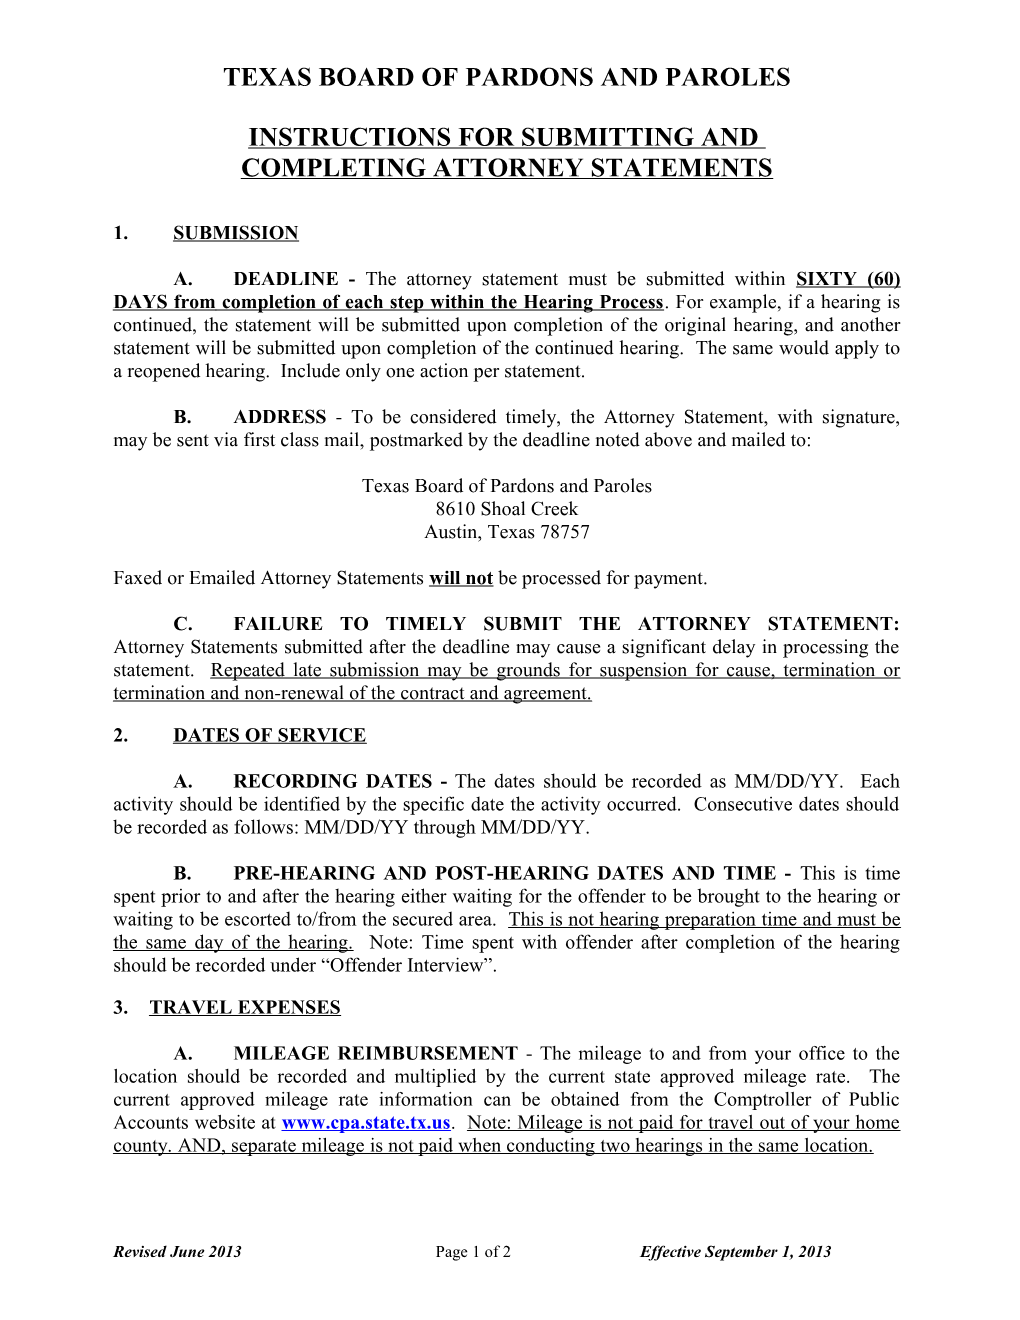 Instructions for Submitting and Completing Attorney Statements